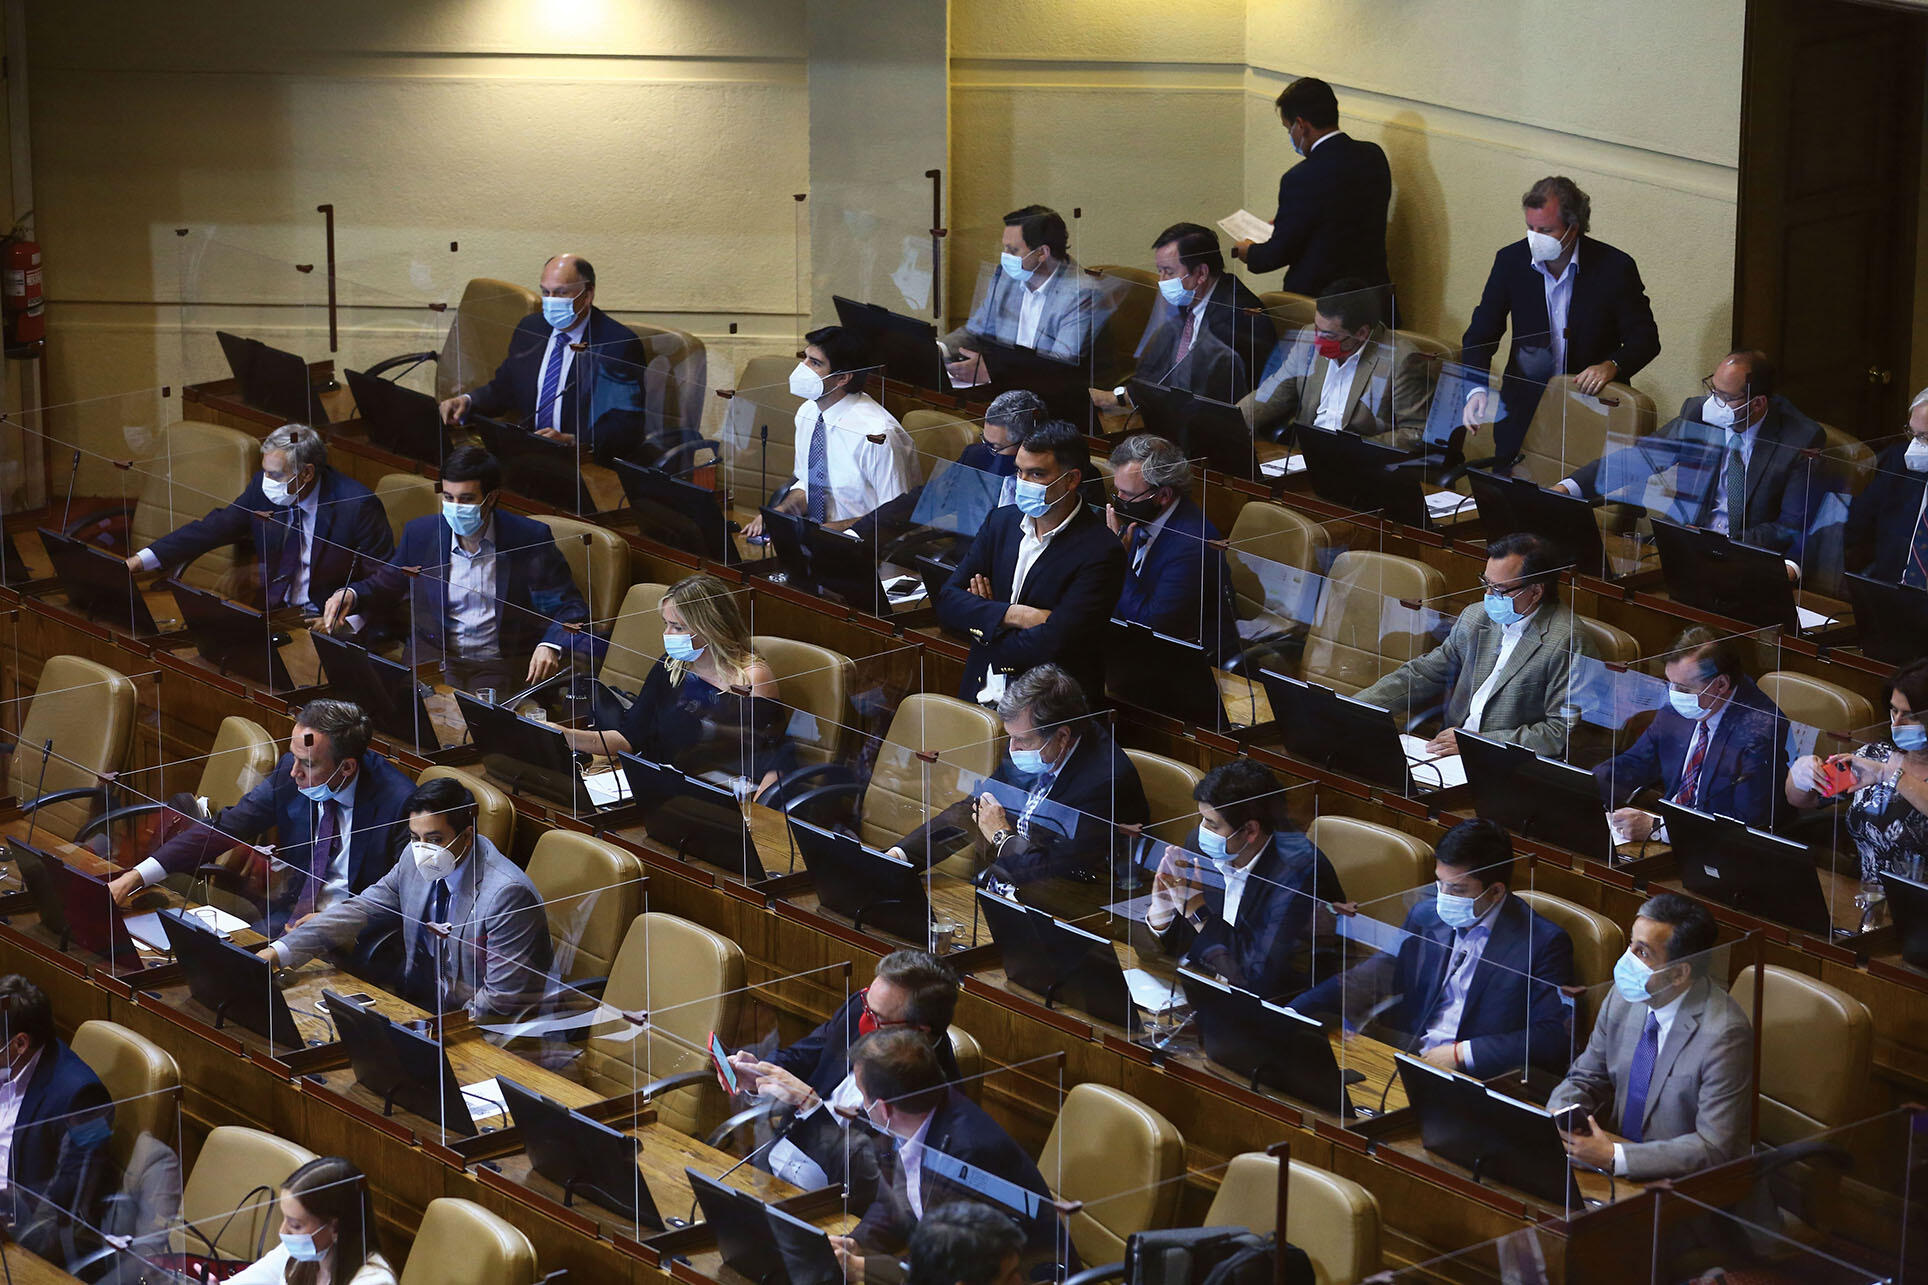 Members of Chile’s Congress sit at their divided desks to discuss constitutional reform during the pandemic, November 2020. (Photo by Vivian Morales C.)